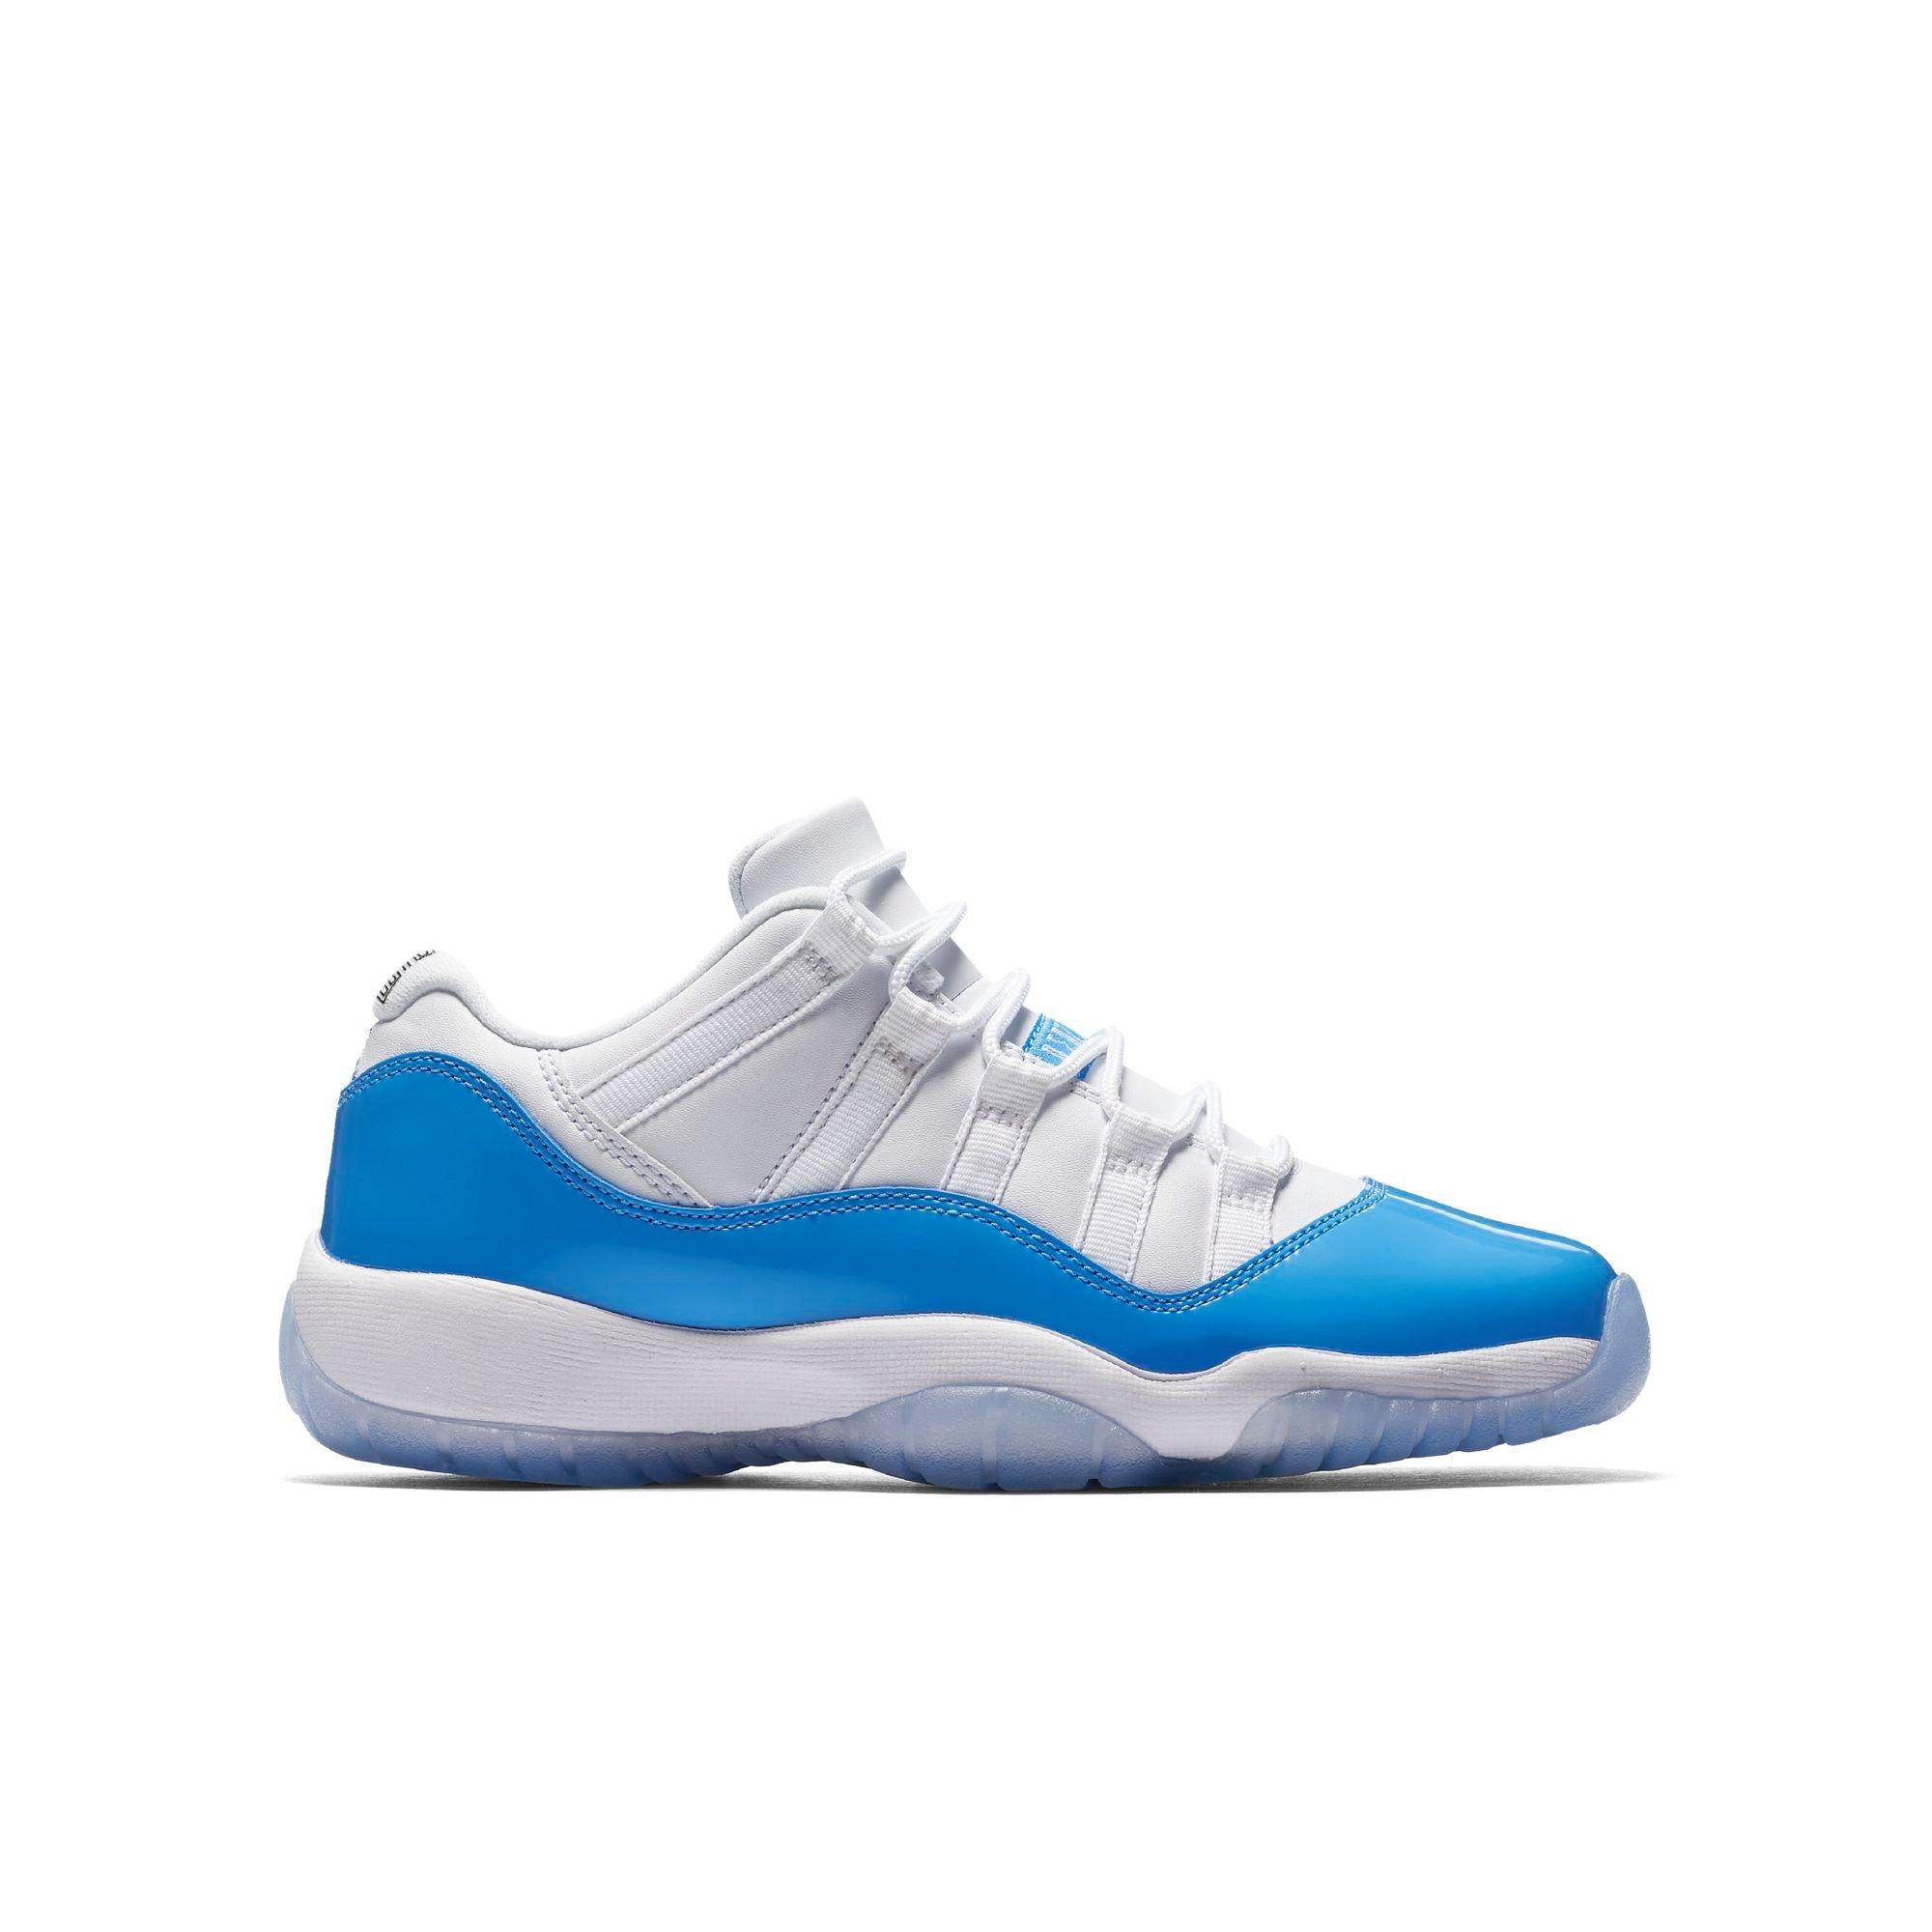 jordan 11 low baby blue and white